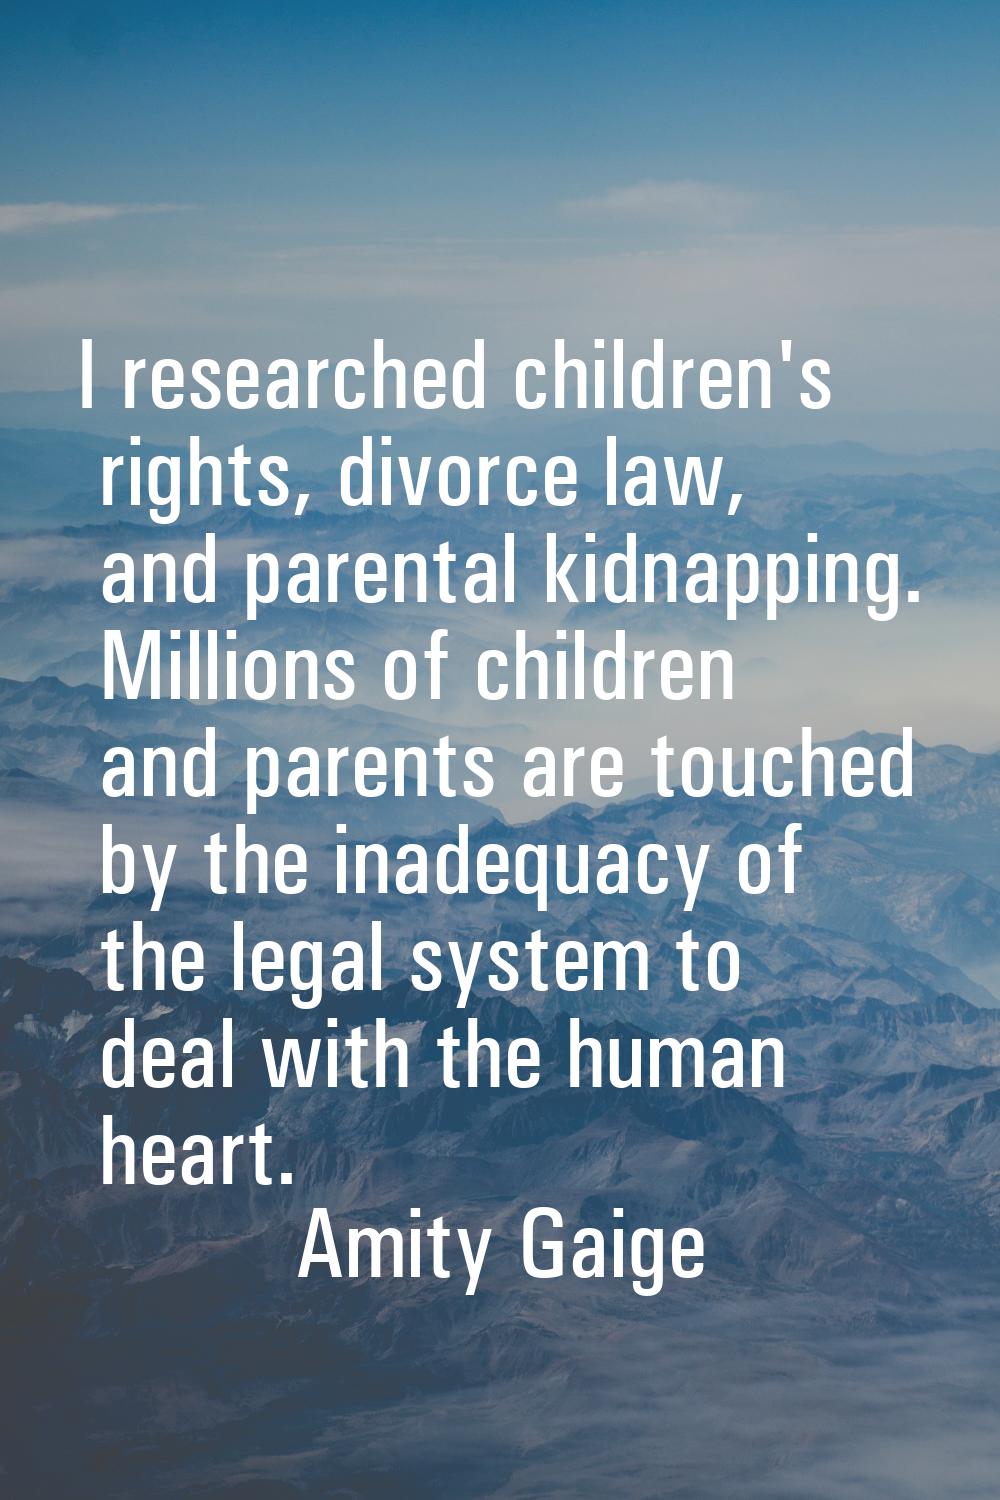 I researched children's rights, divorce law, and parental kidnapping. Millions of children and pare